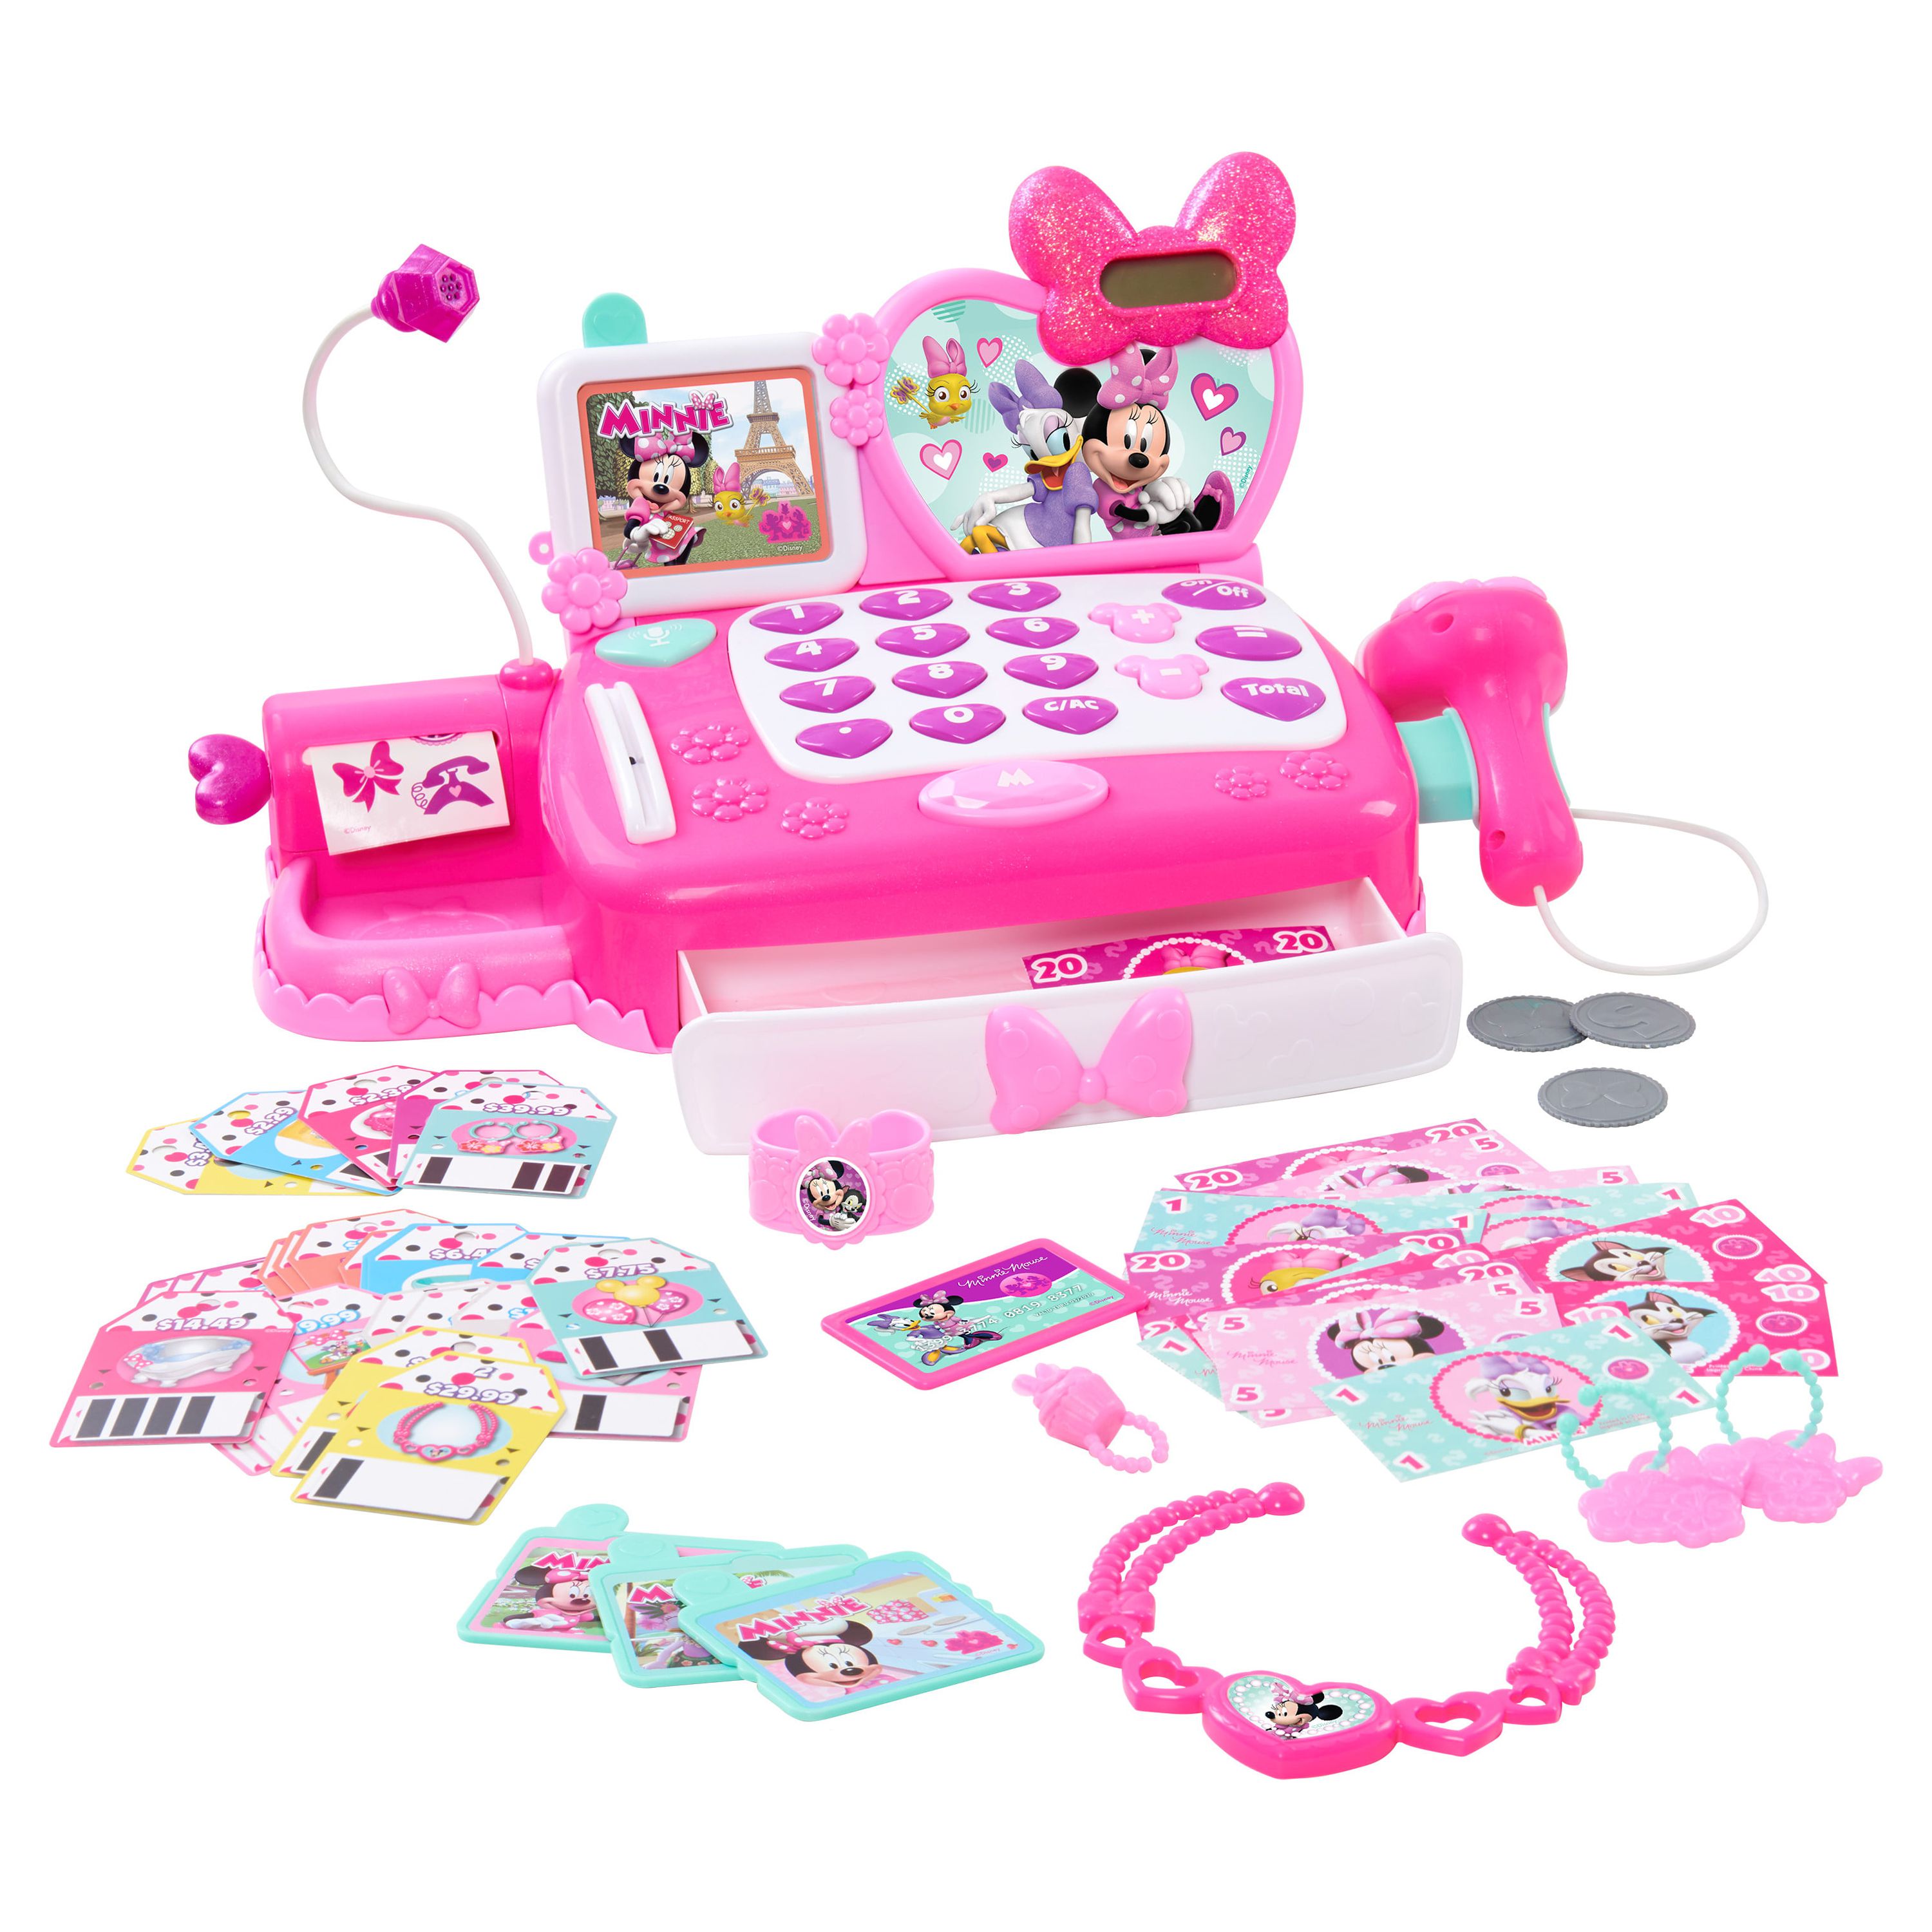 Minnie's Happy Helpers Shop N' Scan Talking Cash Register, Role Play, Ages 3 Up, by Just Play - image 1 of 7